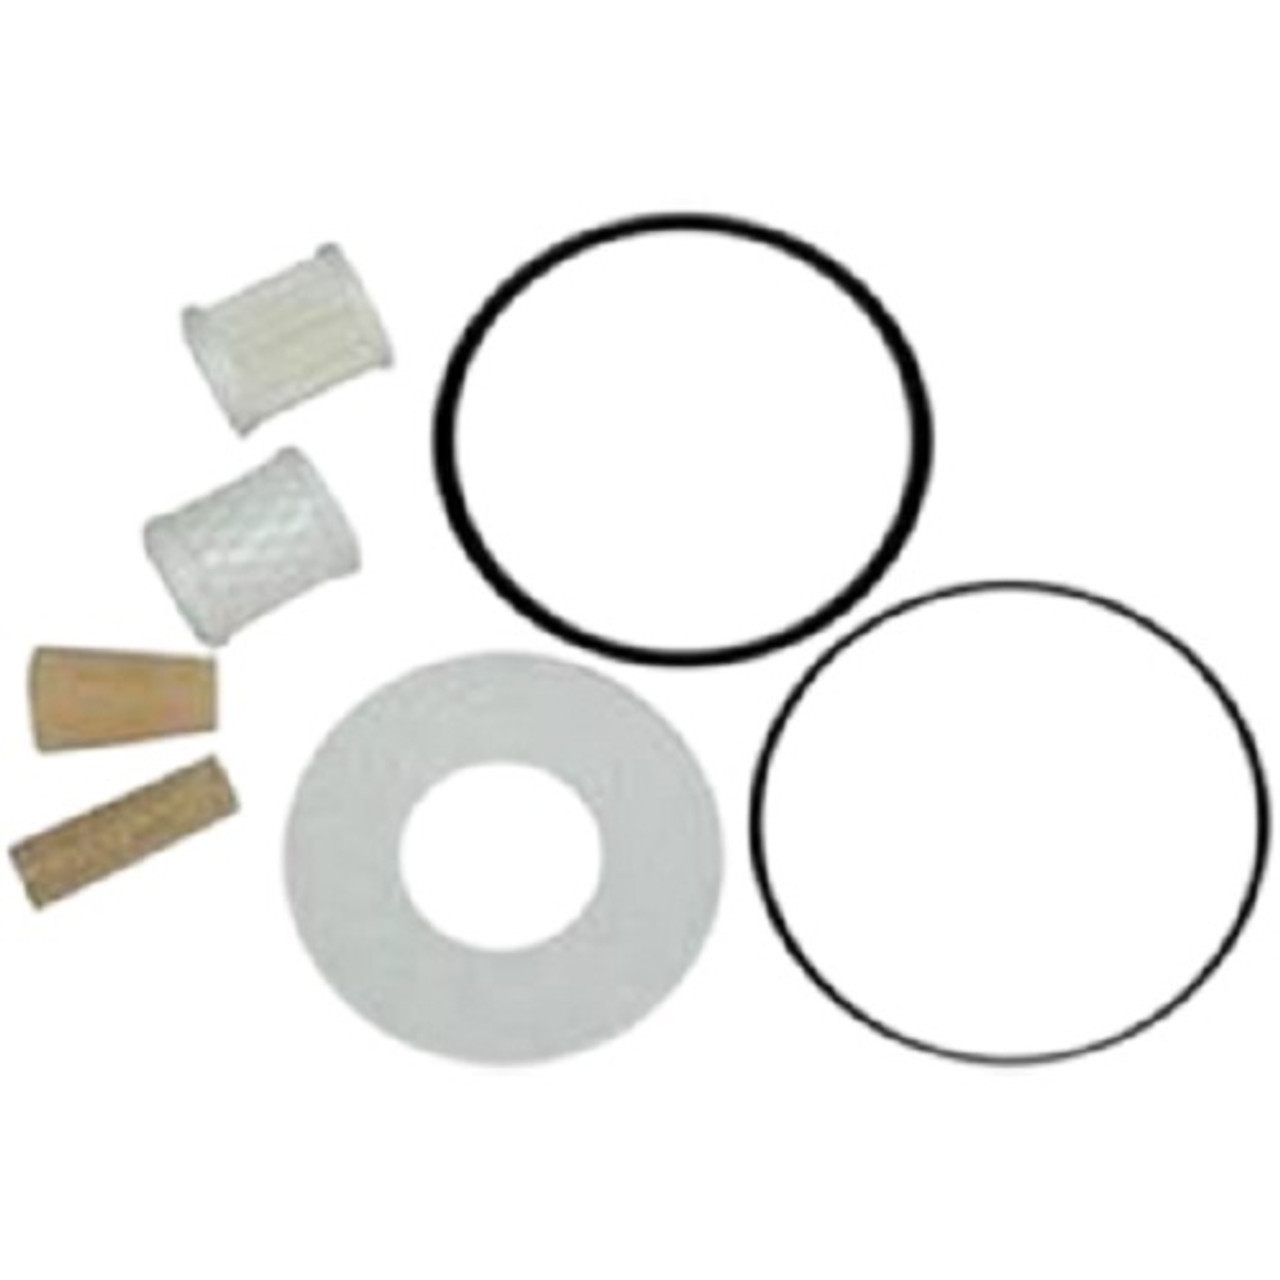 Filter For ATD-7785